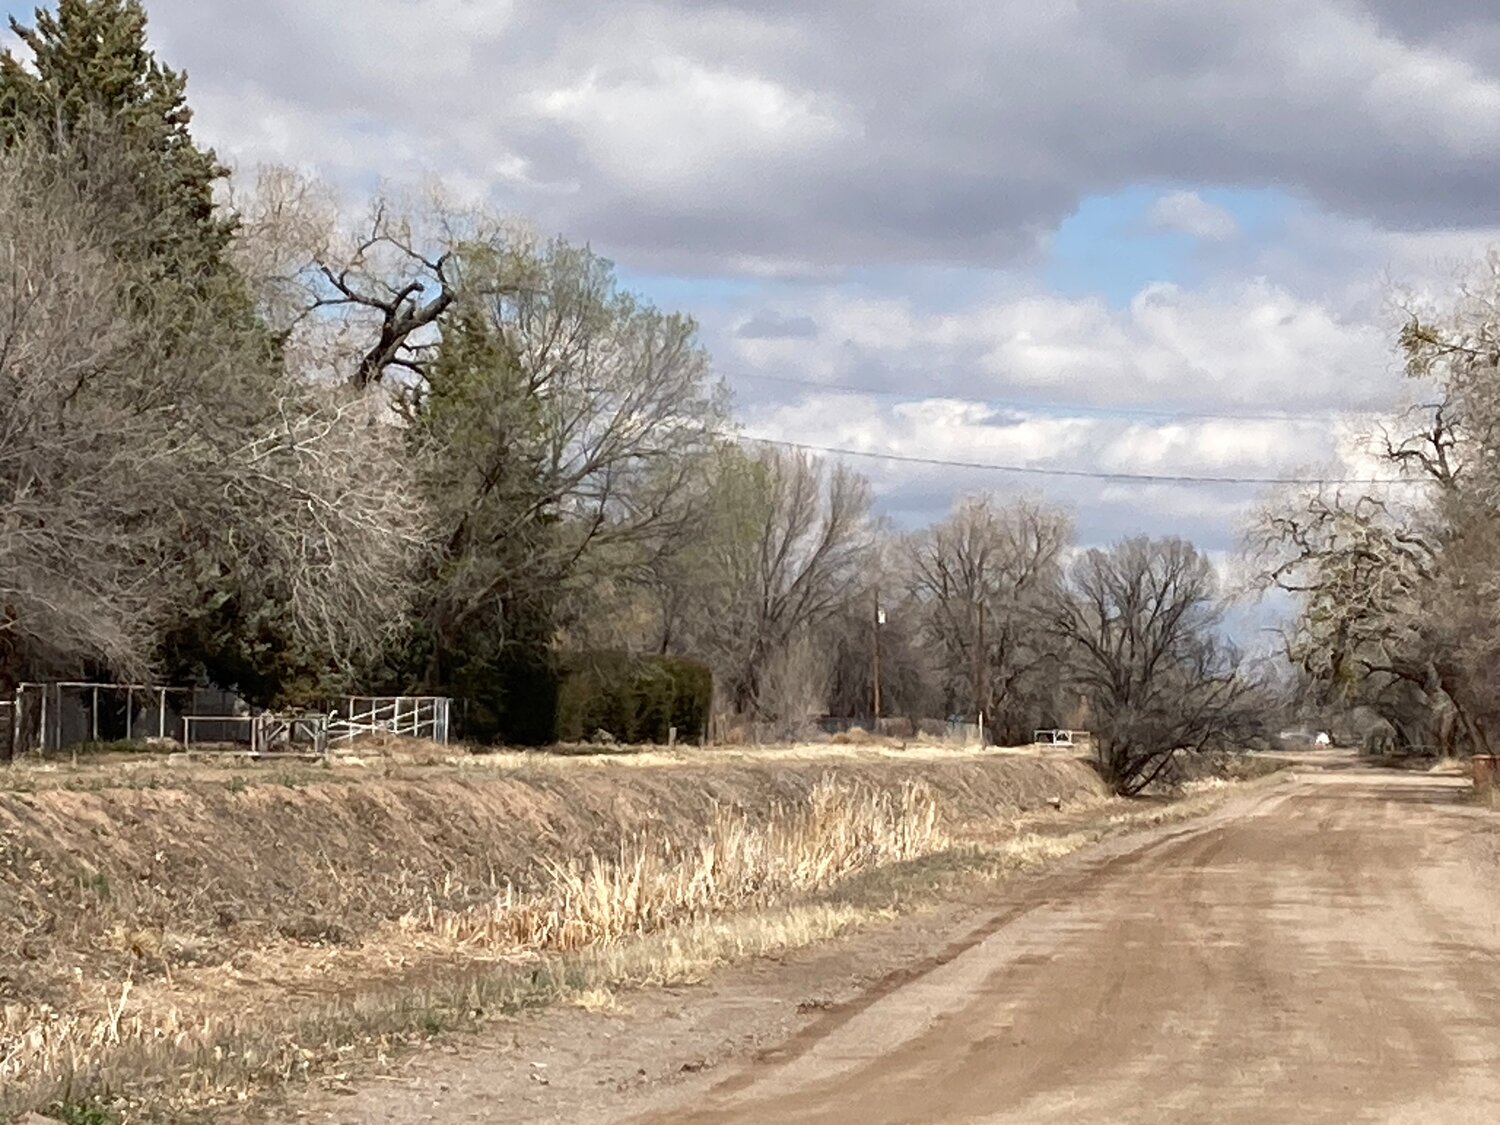 The Corrales Interior Drain is mostly dried up. The village and Middle Rio Grande Conservancy District are working on a Joint Powers Agreement that could lead to it becoming a developed greenway and pedestrian route.